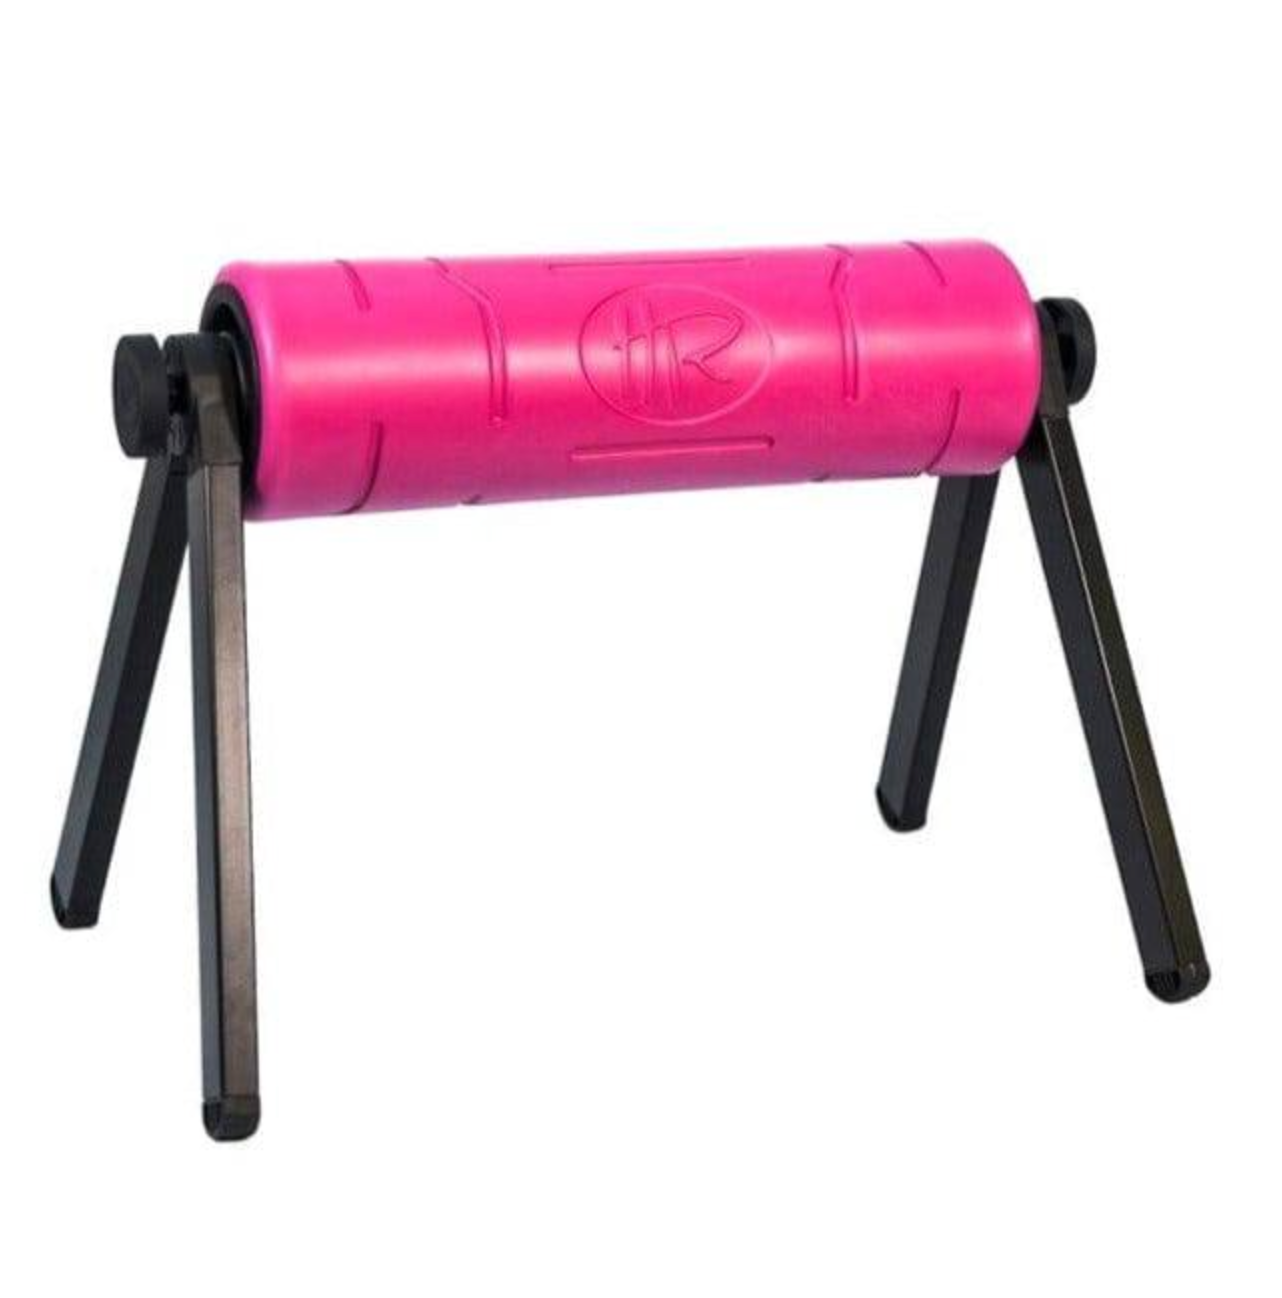 HighRoller Stationary Foam Roller for Fitness, Yoga and Workout –